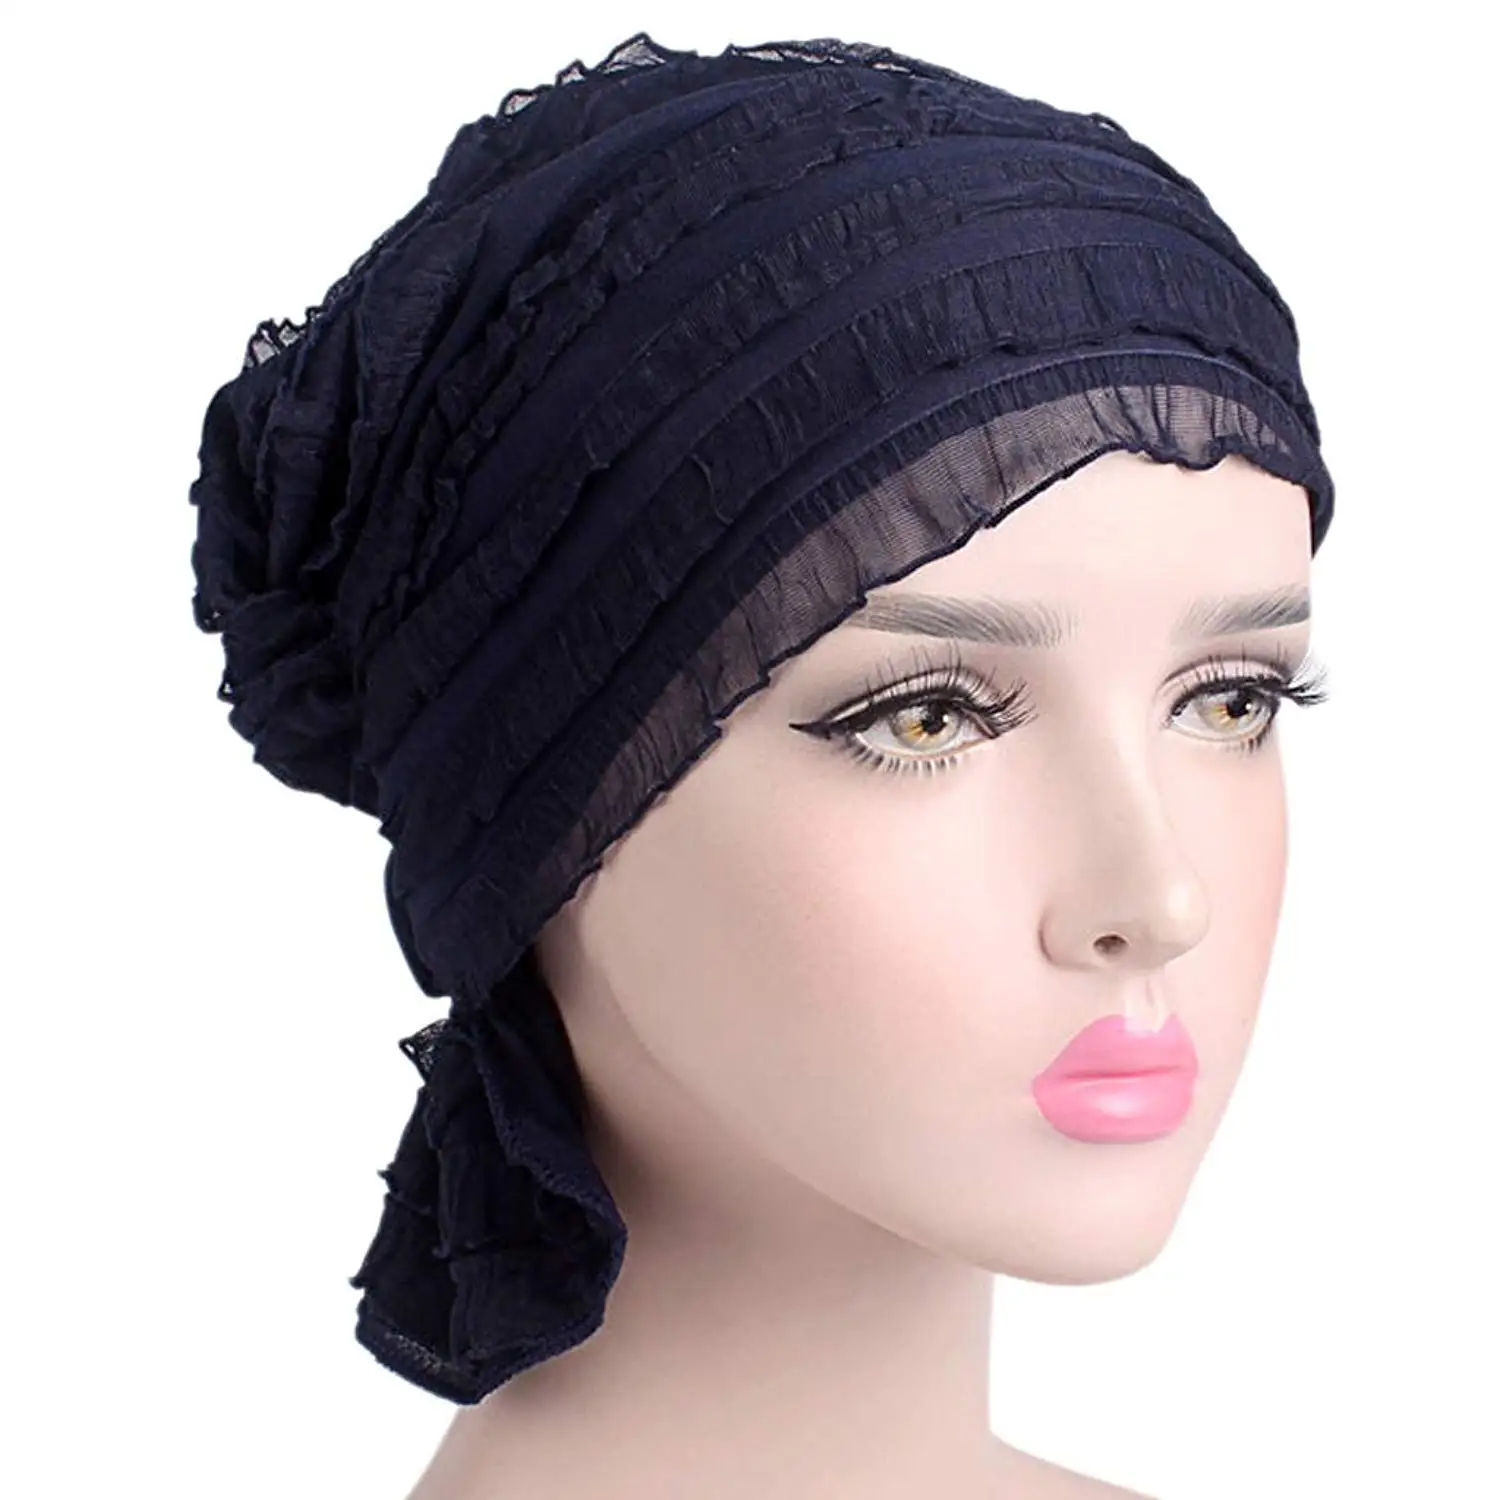 Cheap Head Scarves For Cancer Patients, find Head Scarves For Cancer ...